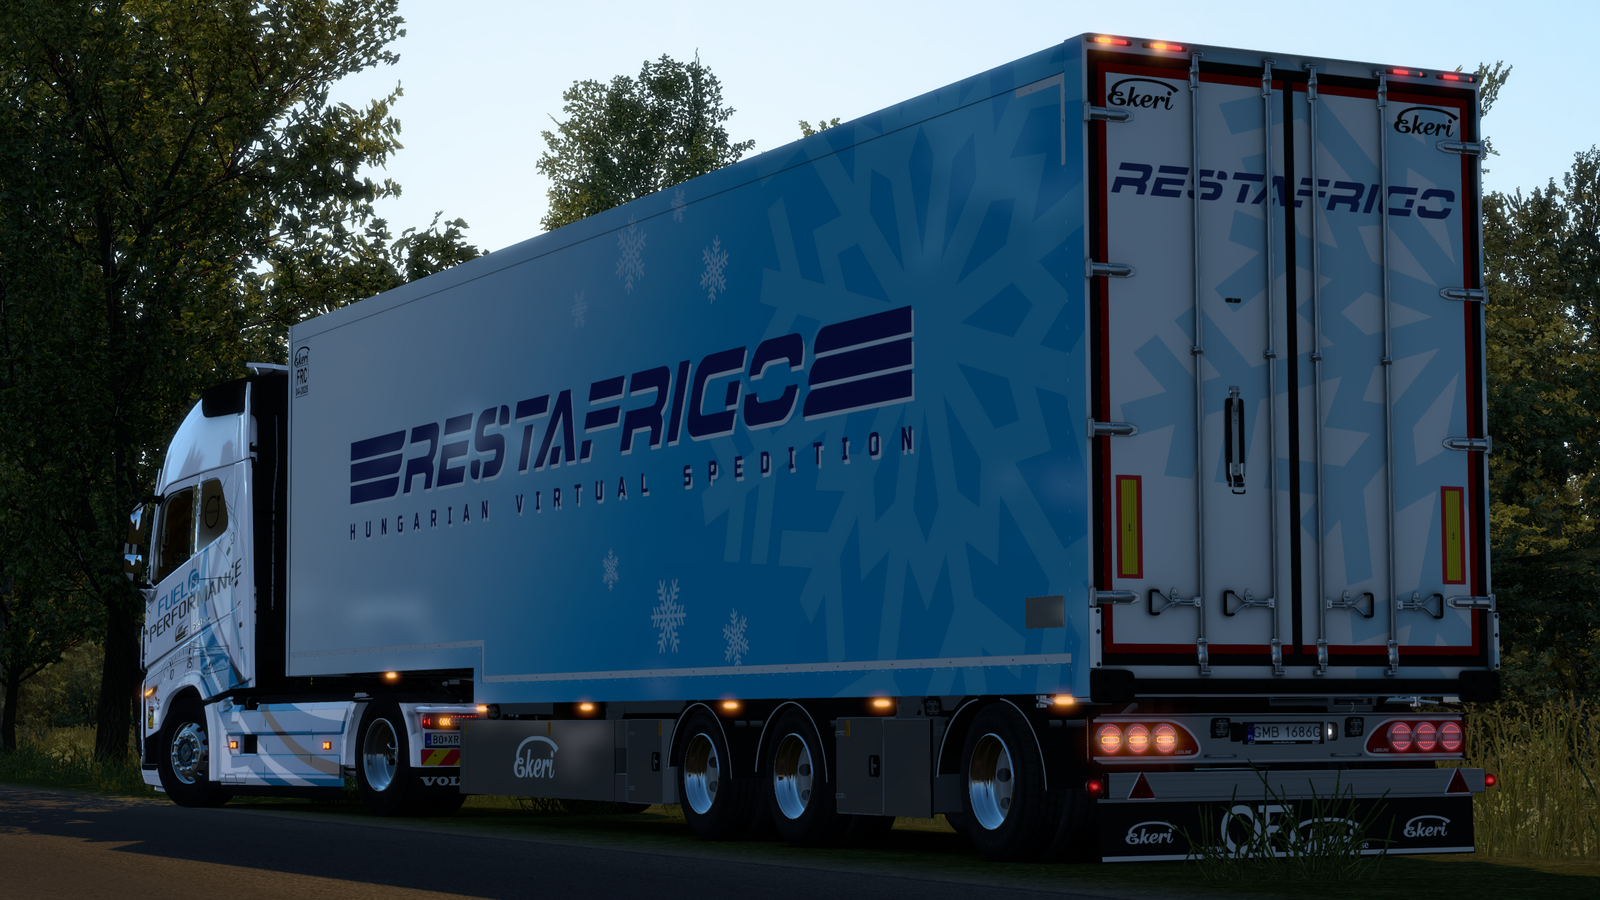 ets2_20221229_235948_00.png